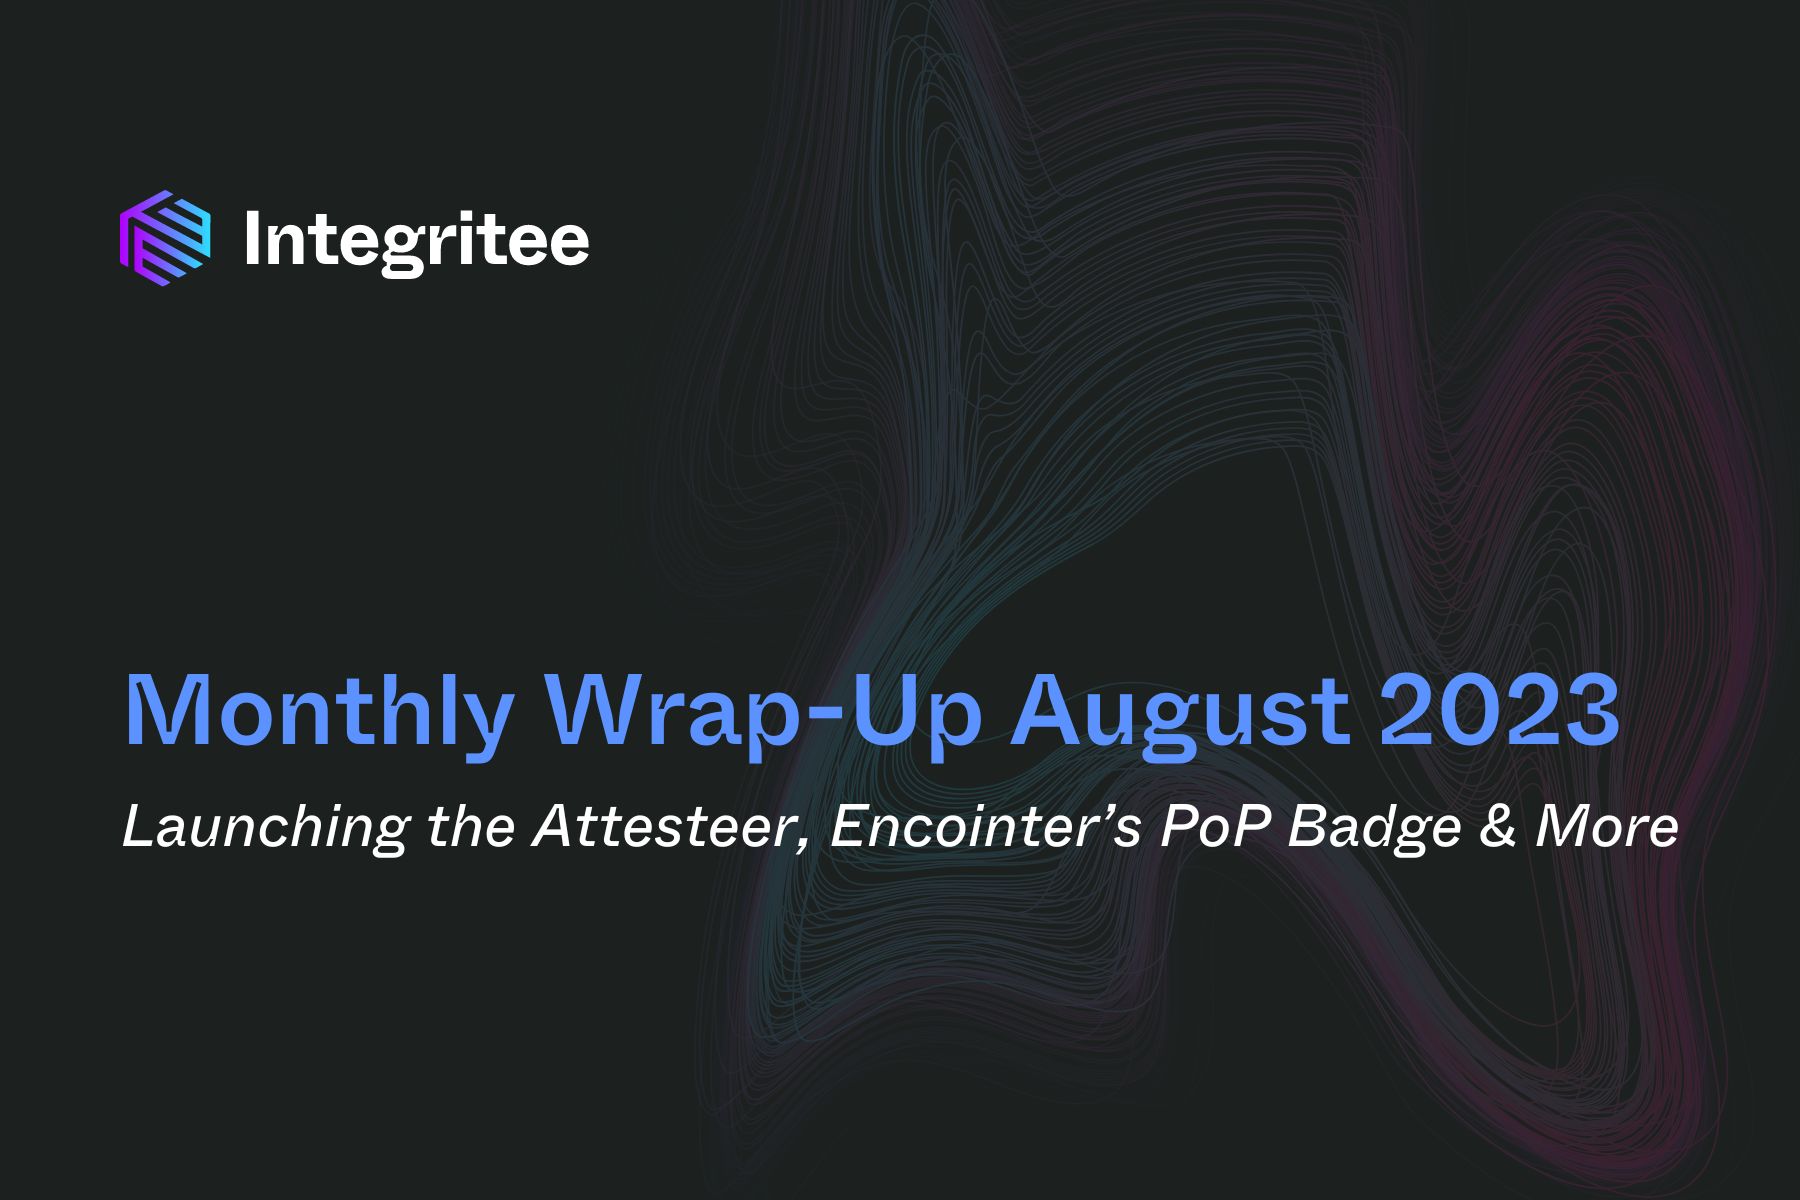 Monthly Wrap-Up August 2023: Launching the Attesteer, Encointer’s PoP Badge & More